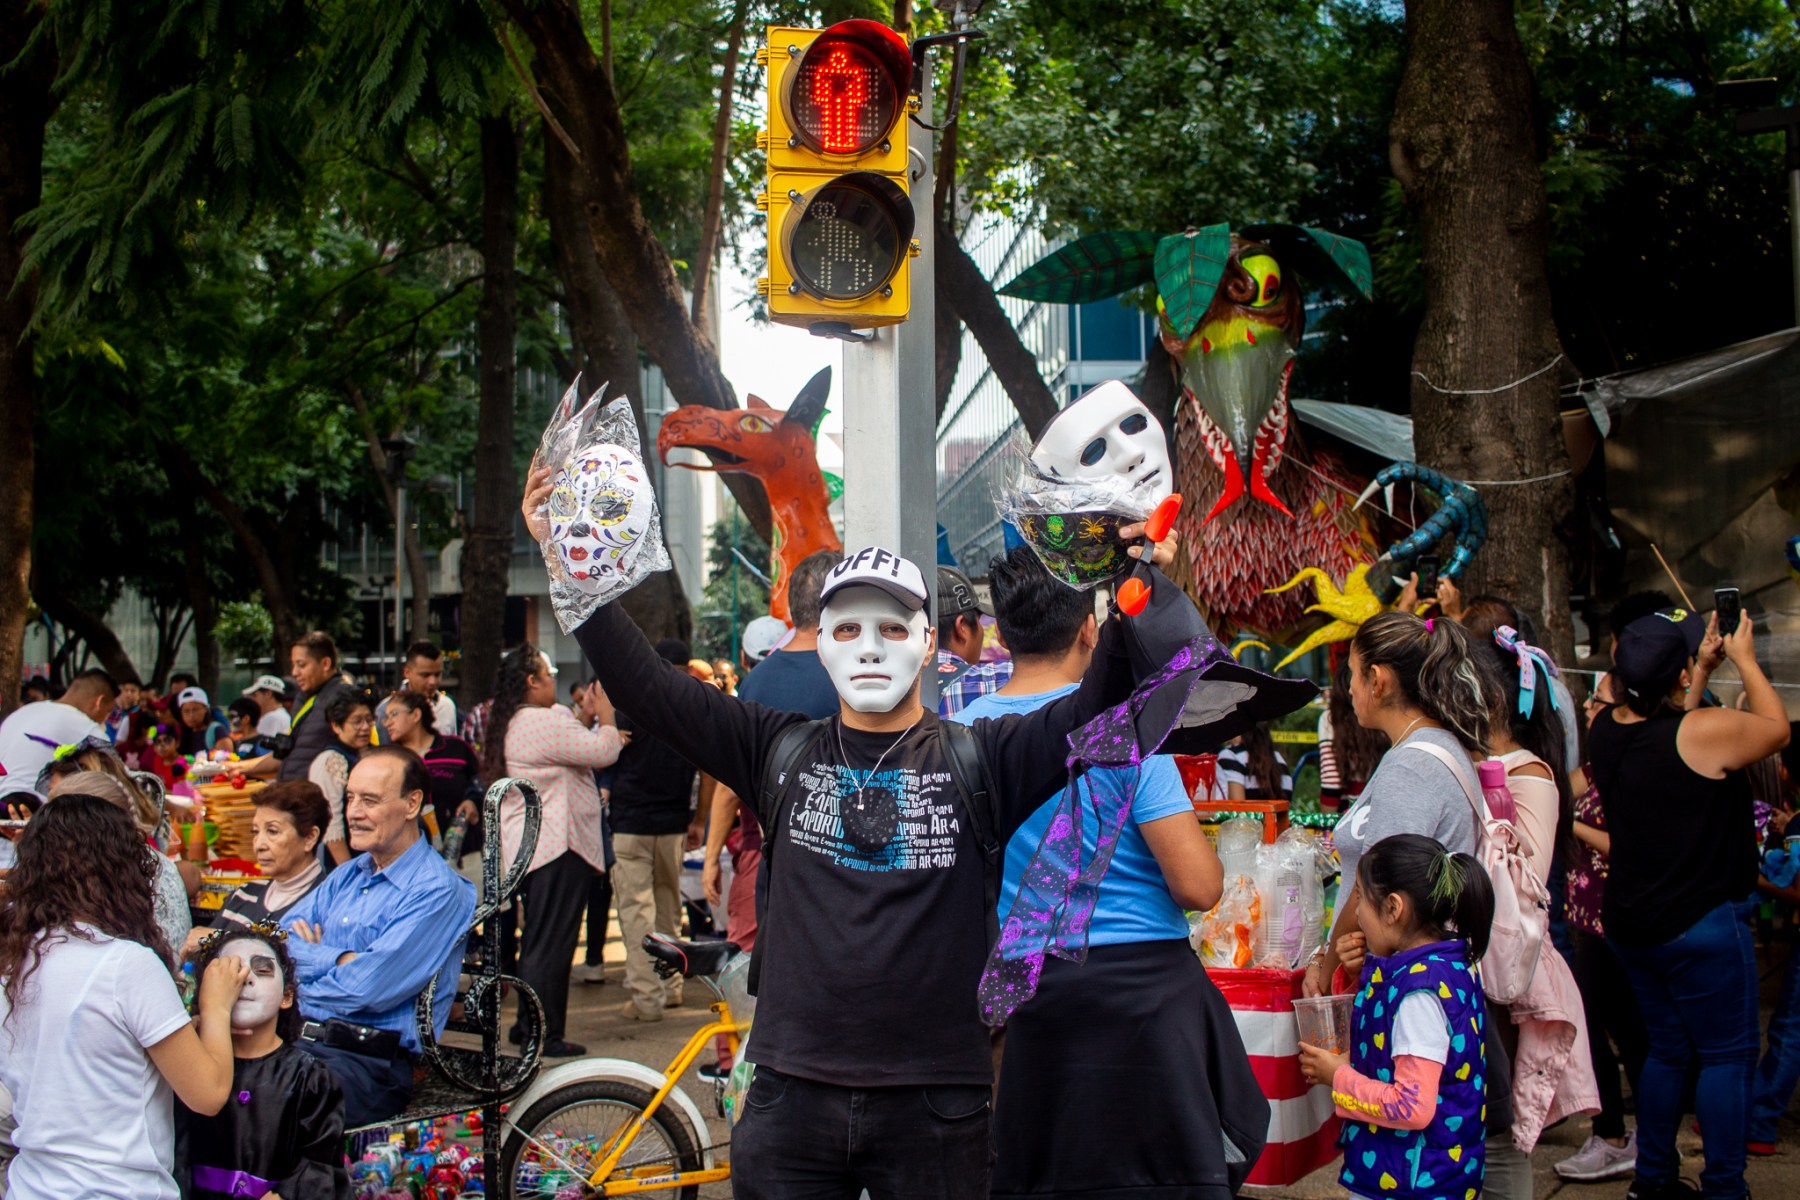 If you walk around Mexico City on any day you’ll be struck the volume of people selling things out in the street. The parades only serve to magnify this phenomenon, with countless vendors selling Día de Muertos-themed foods and costumes.